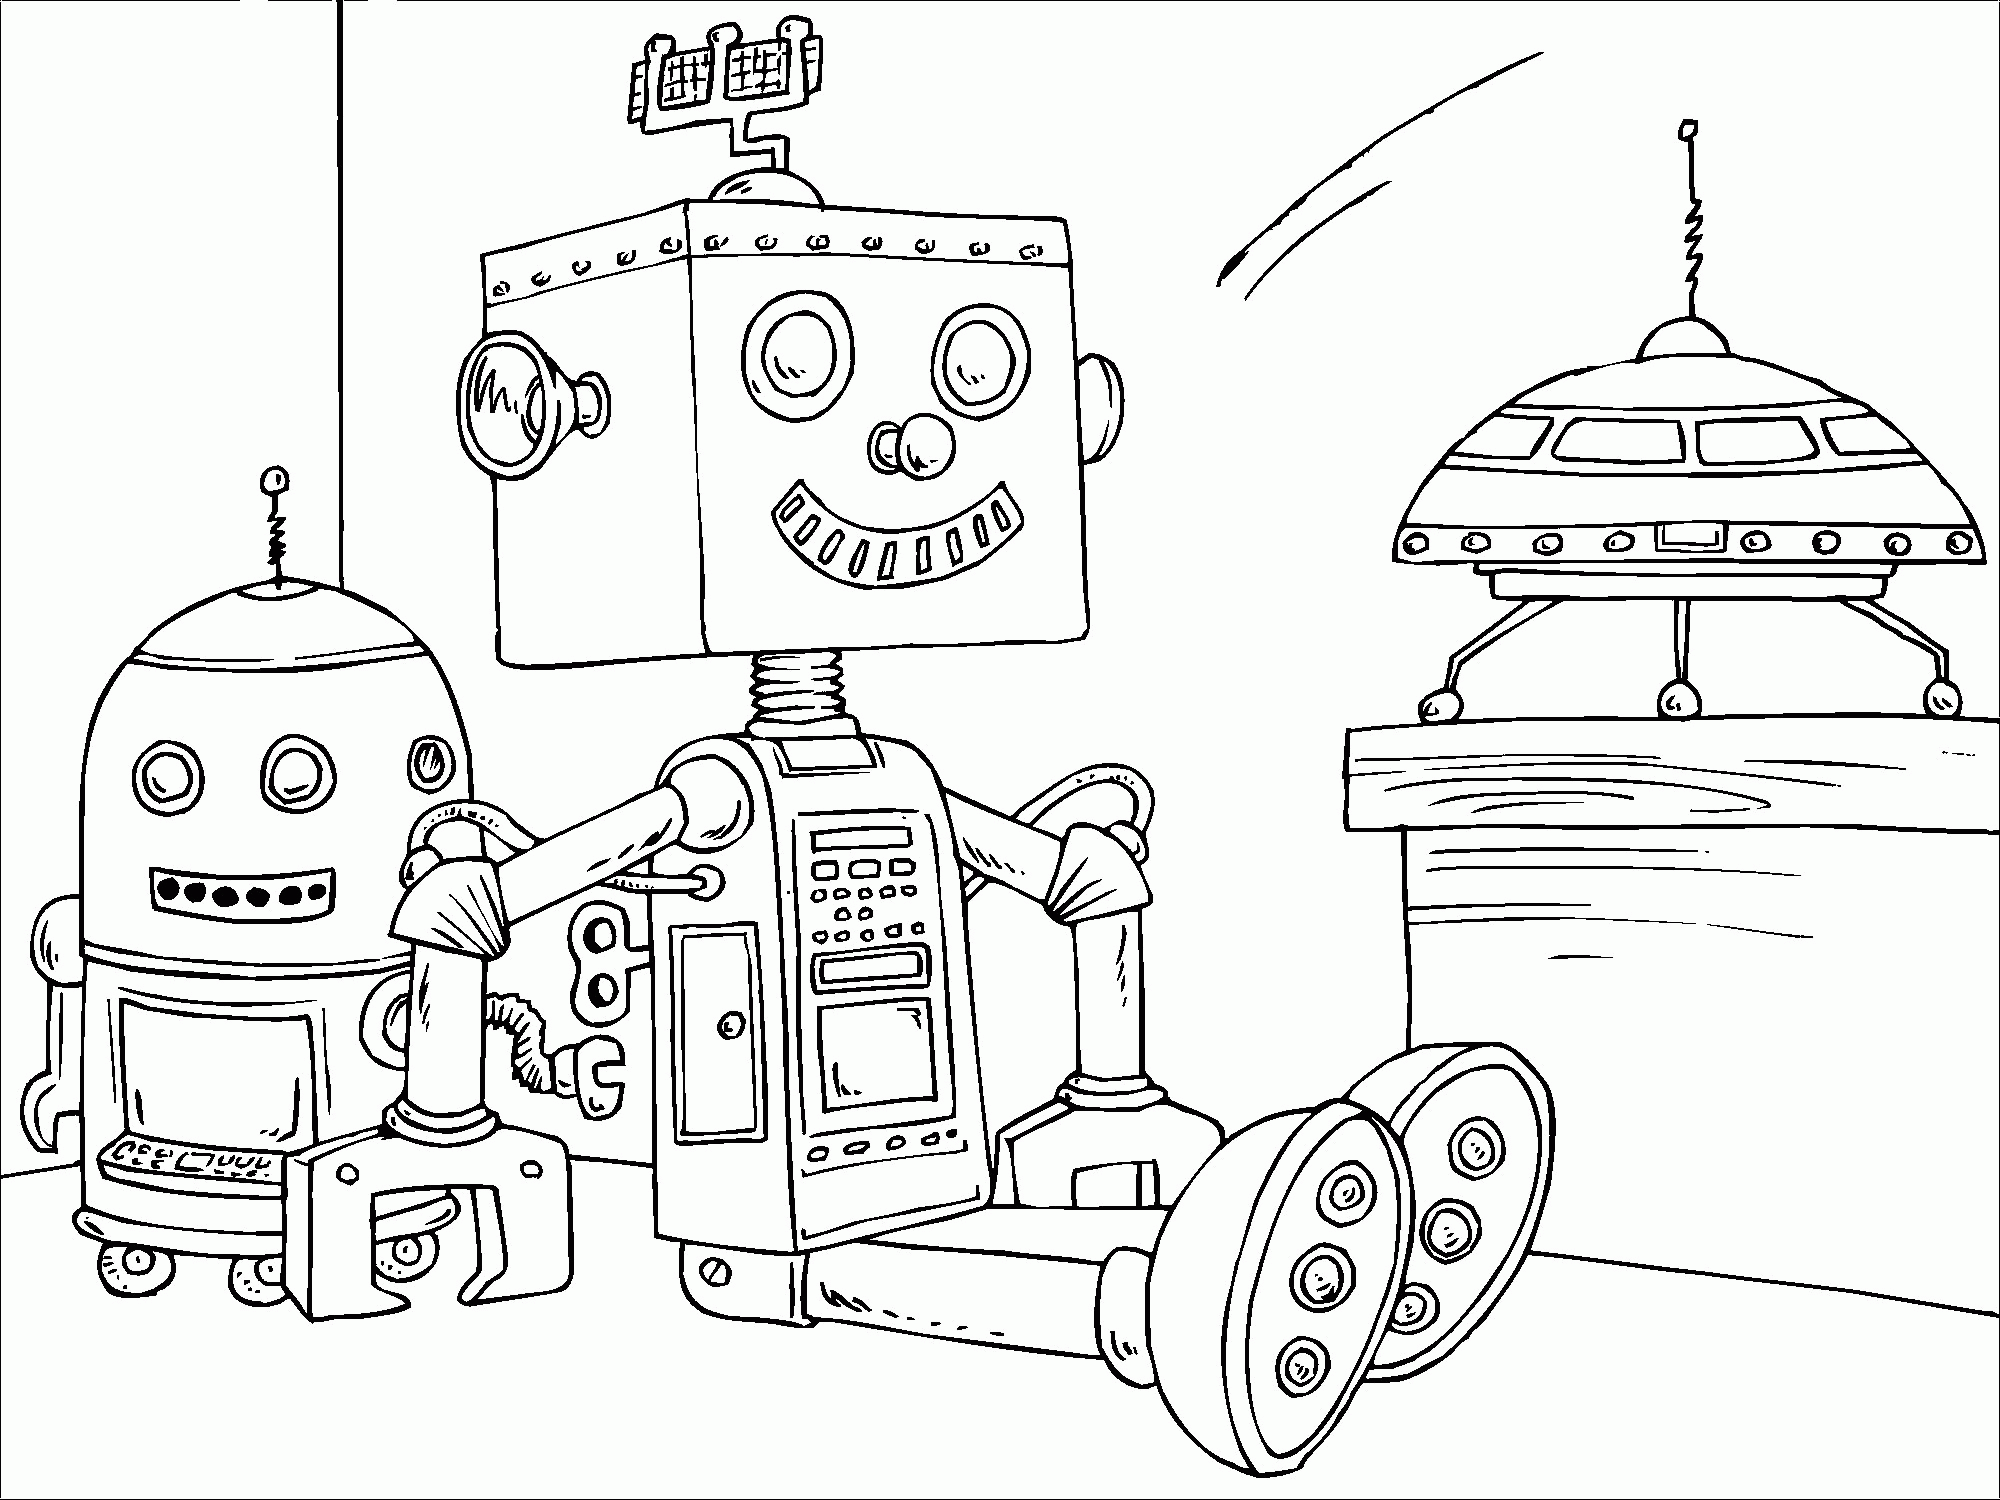 Coloring Pages Of Robots To Print - Coloring Home